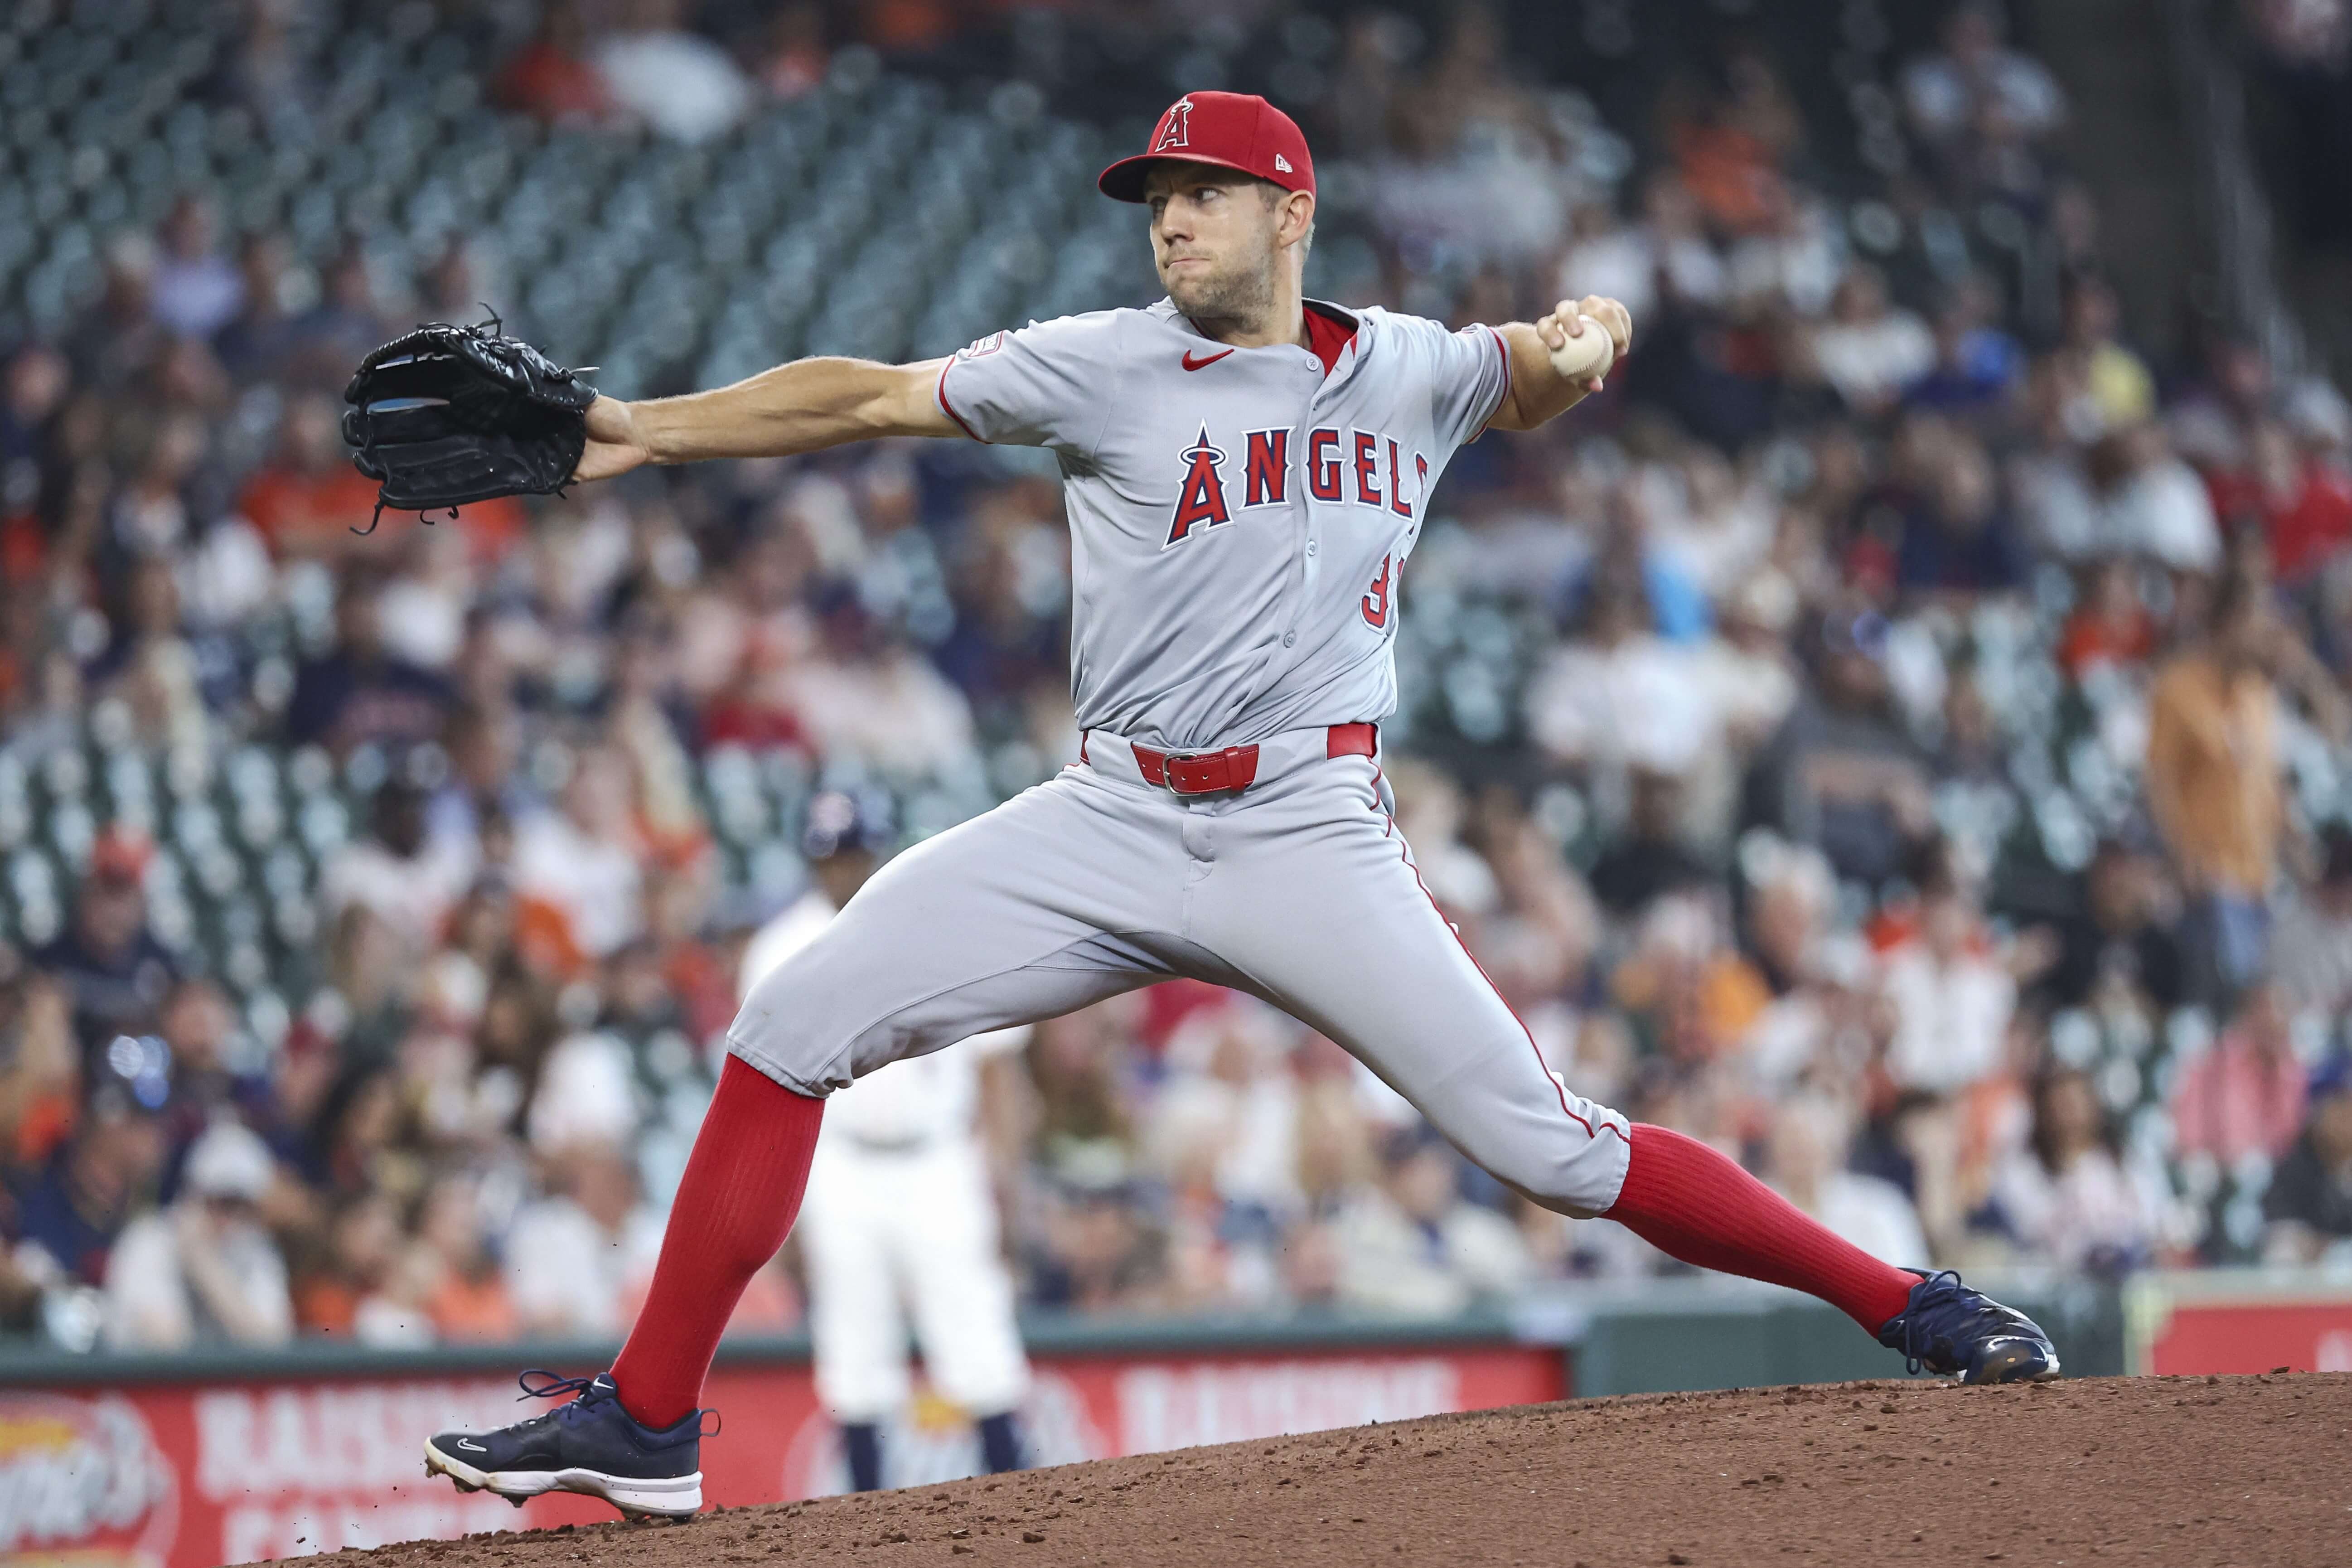 Yankees vs Angels Prediction, Picks, and Odds for Tonight’s MLB Game